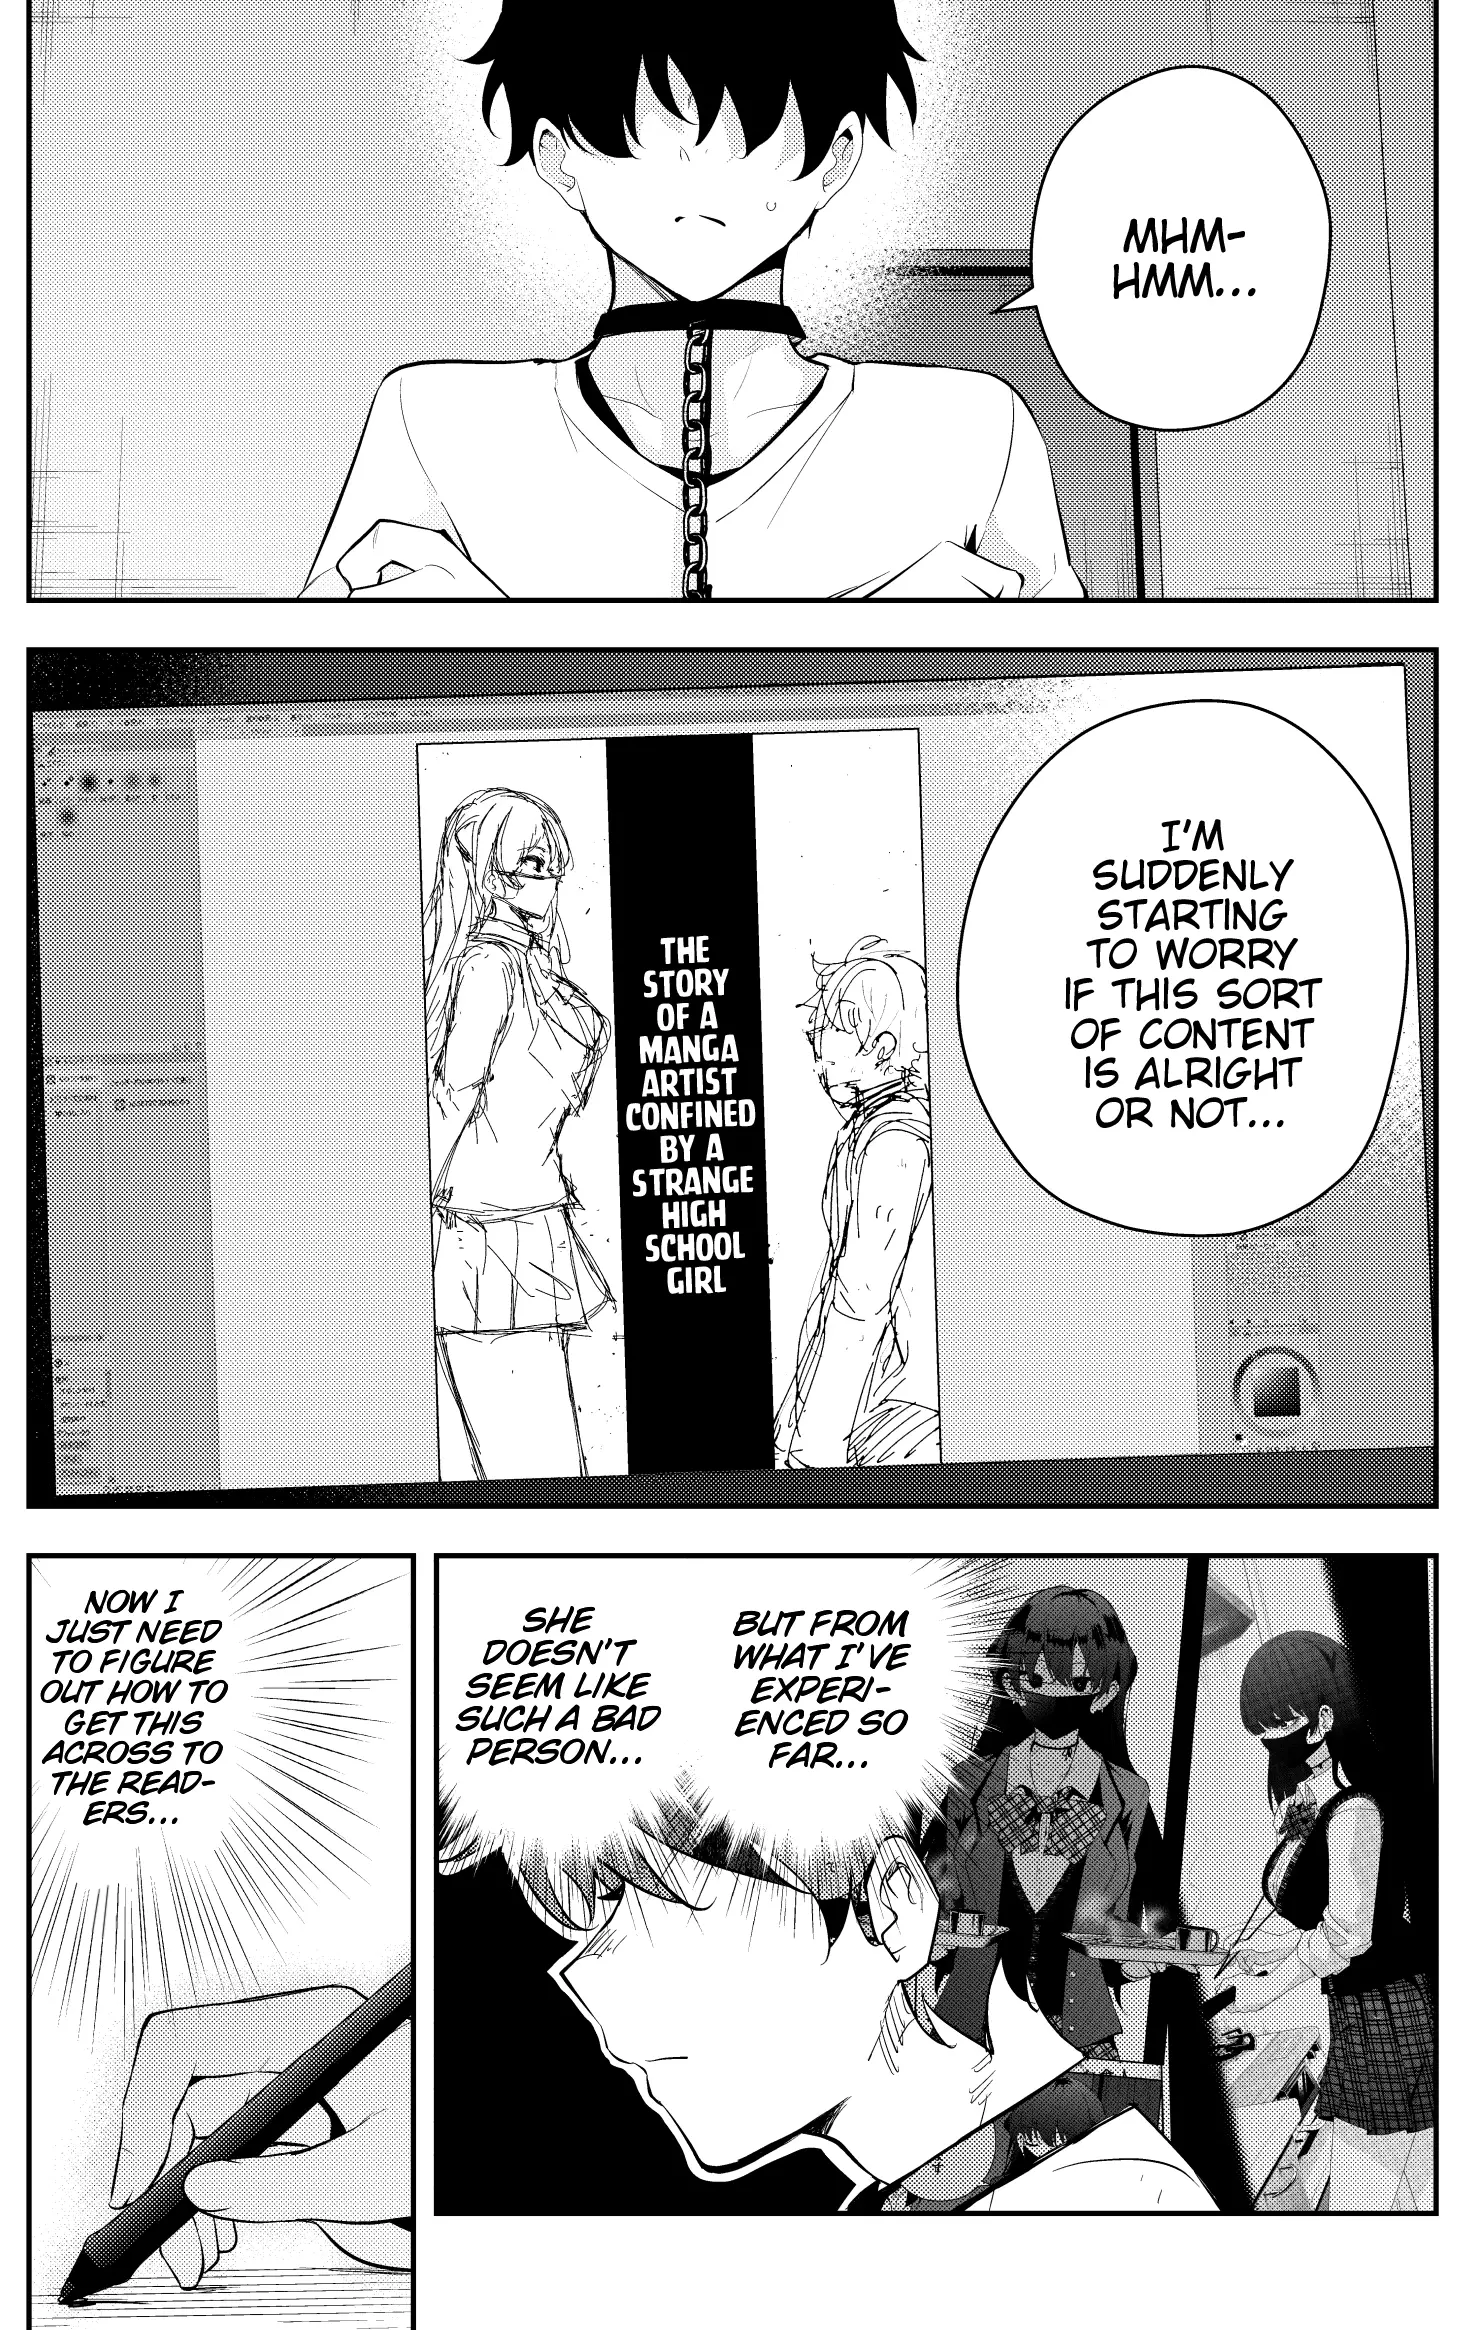 The Story Of A Manga Artist Confined By A Strange High School Girl - 18 page 1-ac50ad5a